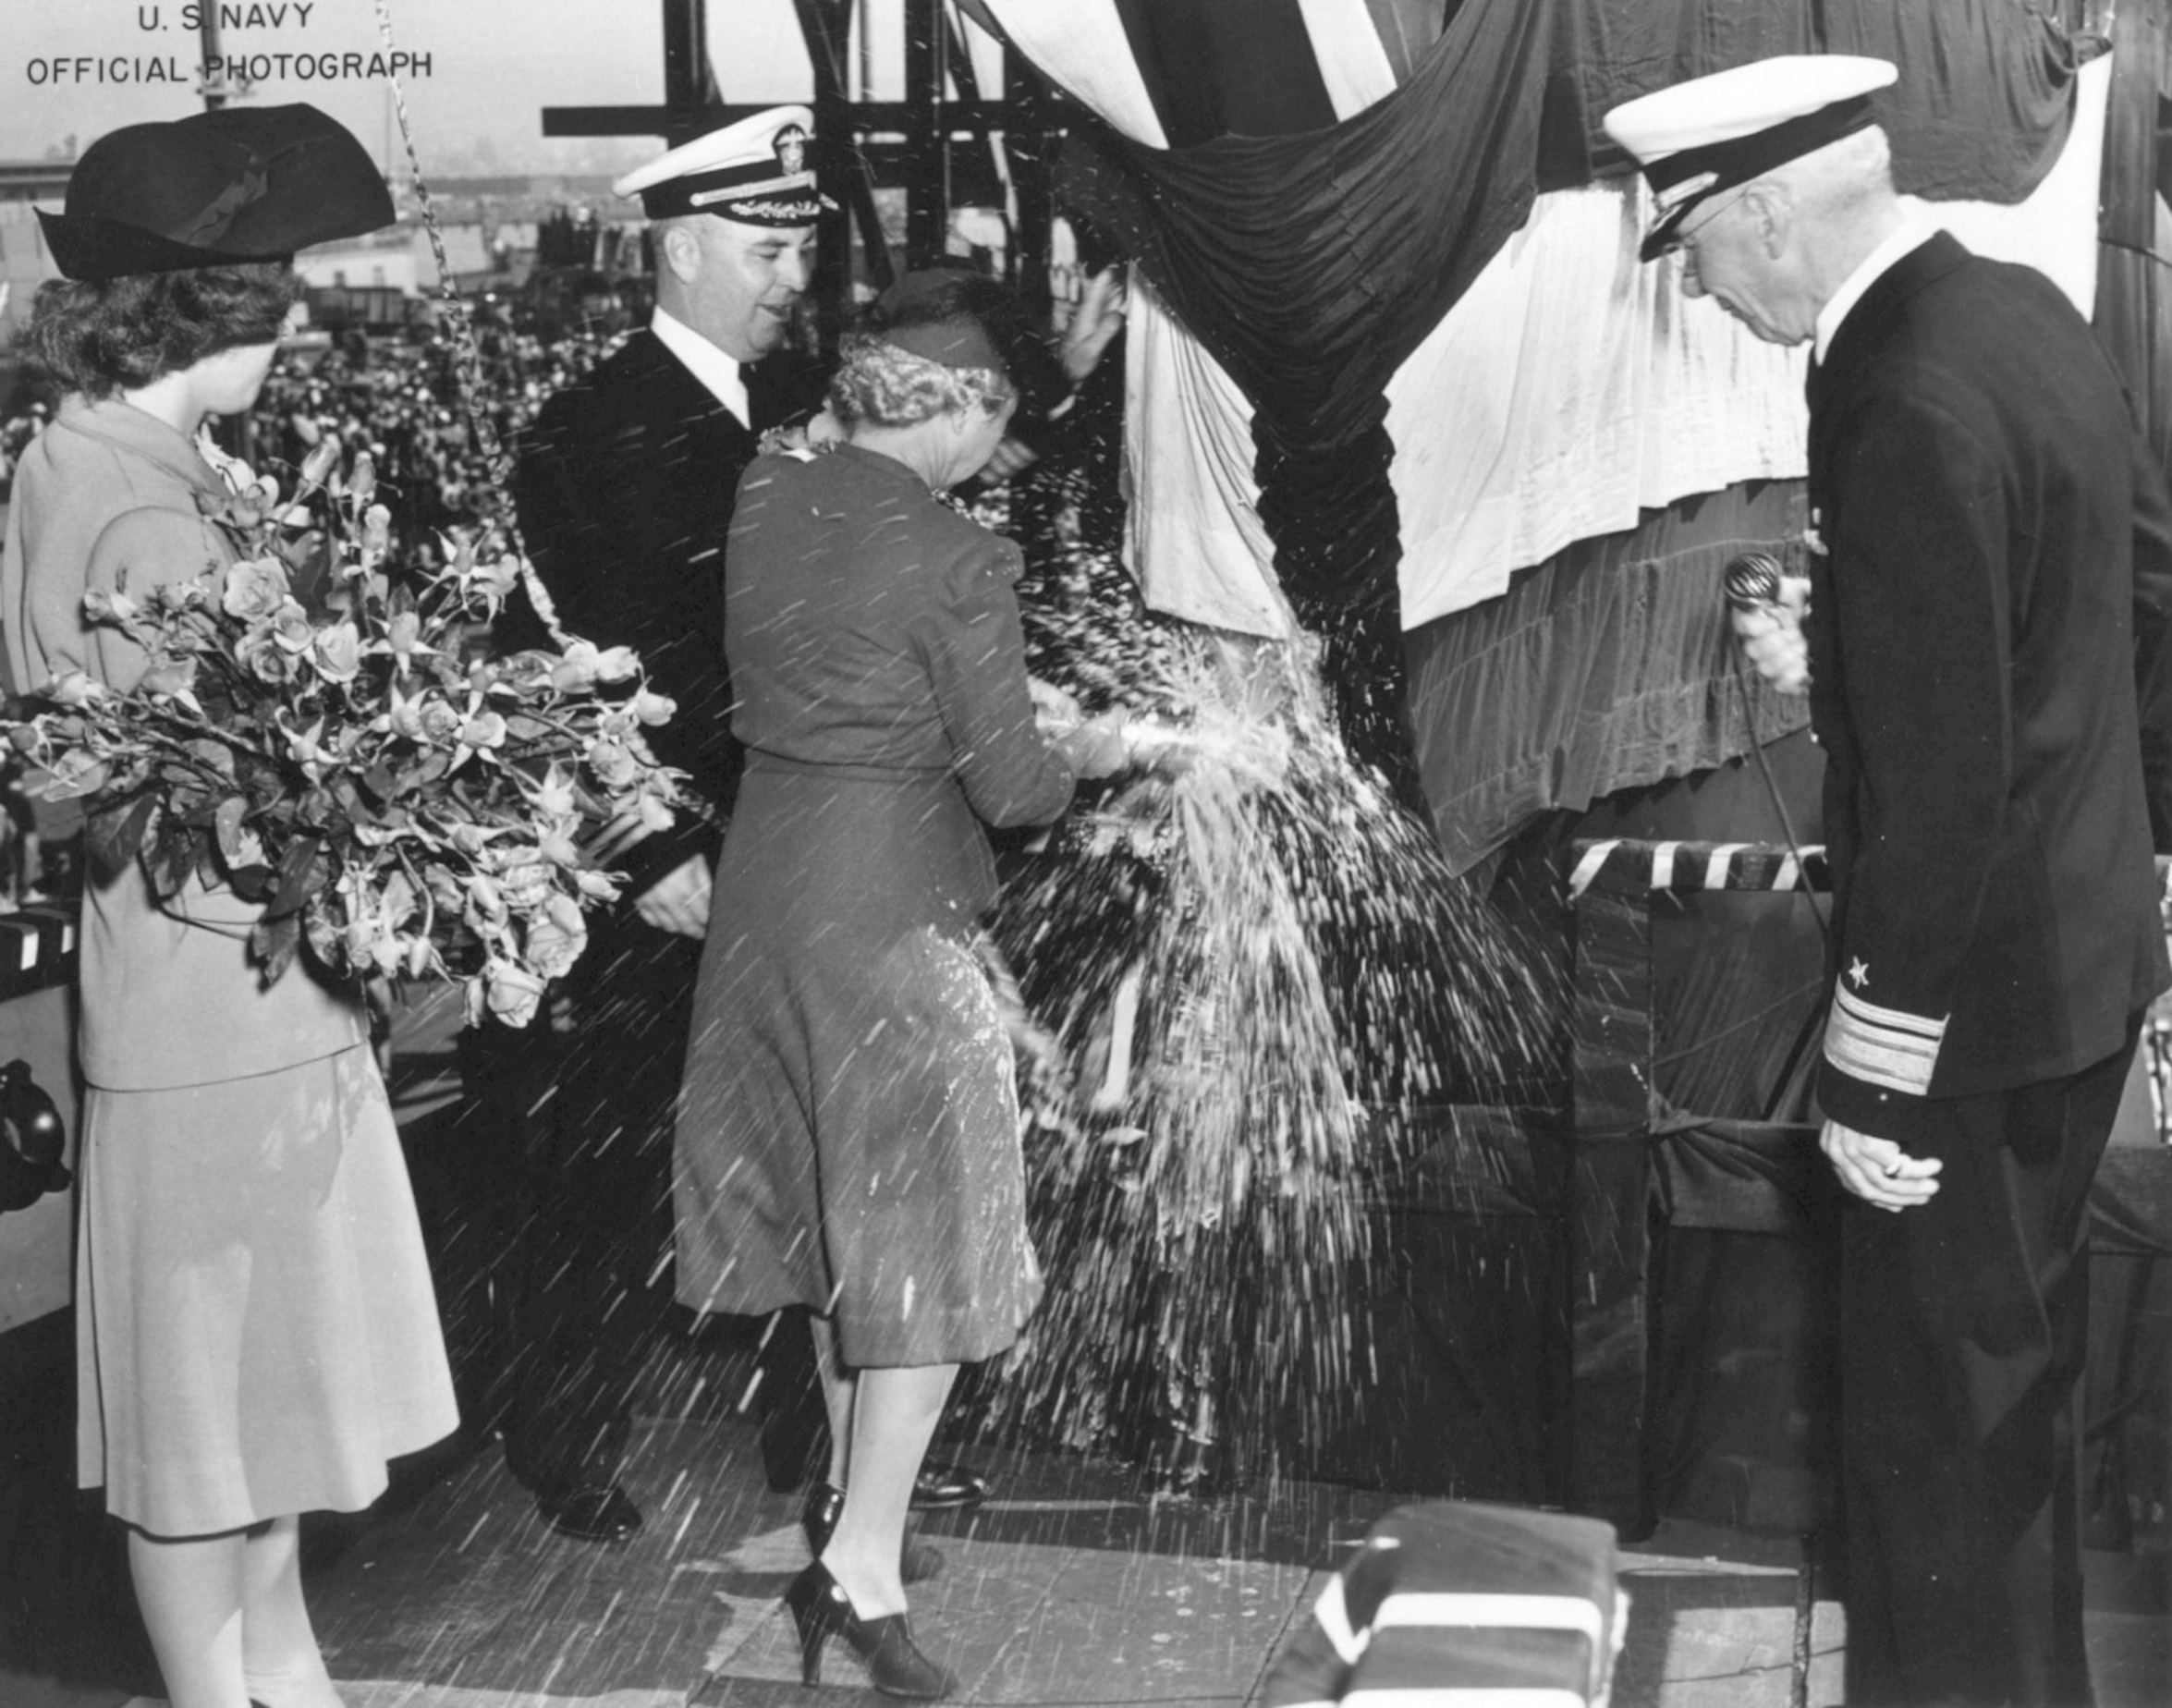 Submarine Tinosa being christened by sponsor Mrs. Katharine Malloy, wife of Captain William Molloy, at Mare Island Navy Yard, Vallejo, California, United States, 7 Oct 1942.